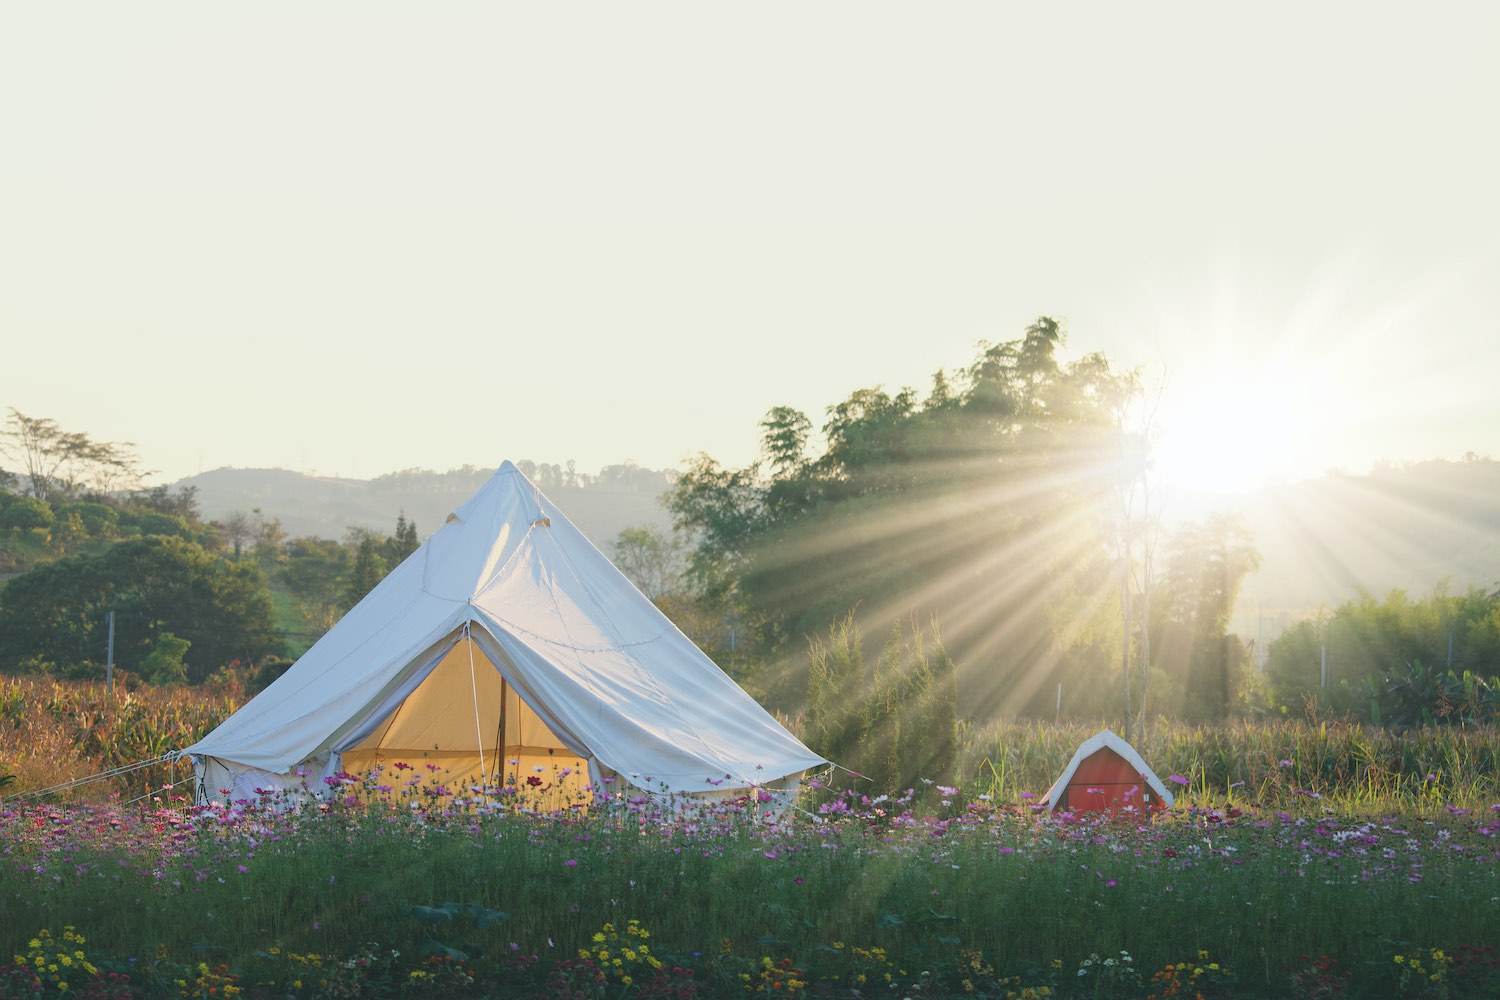 TOP 20 Glamping Southern California Sites in 20 [Updated]